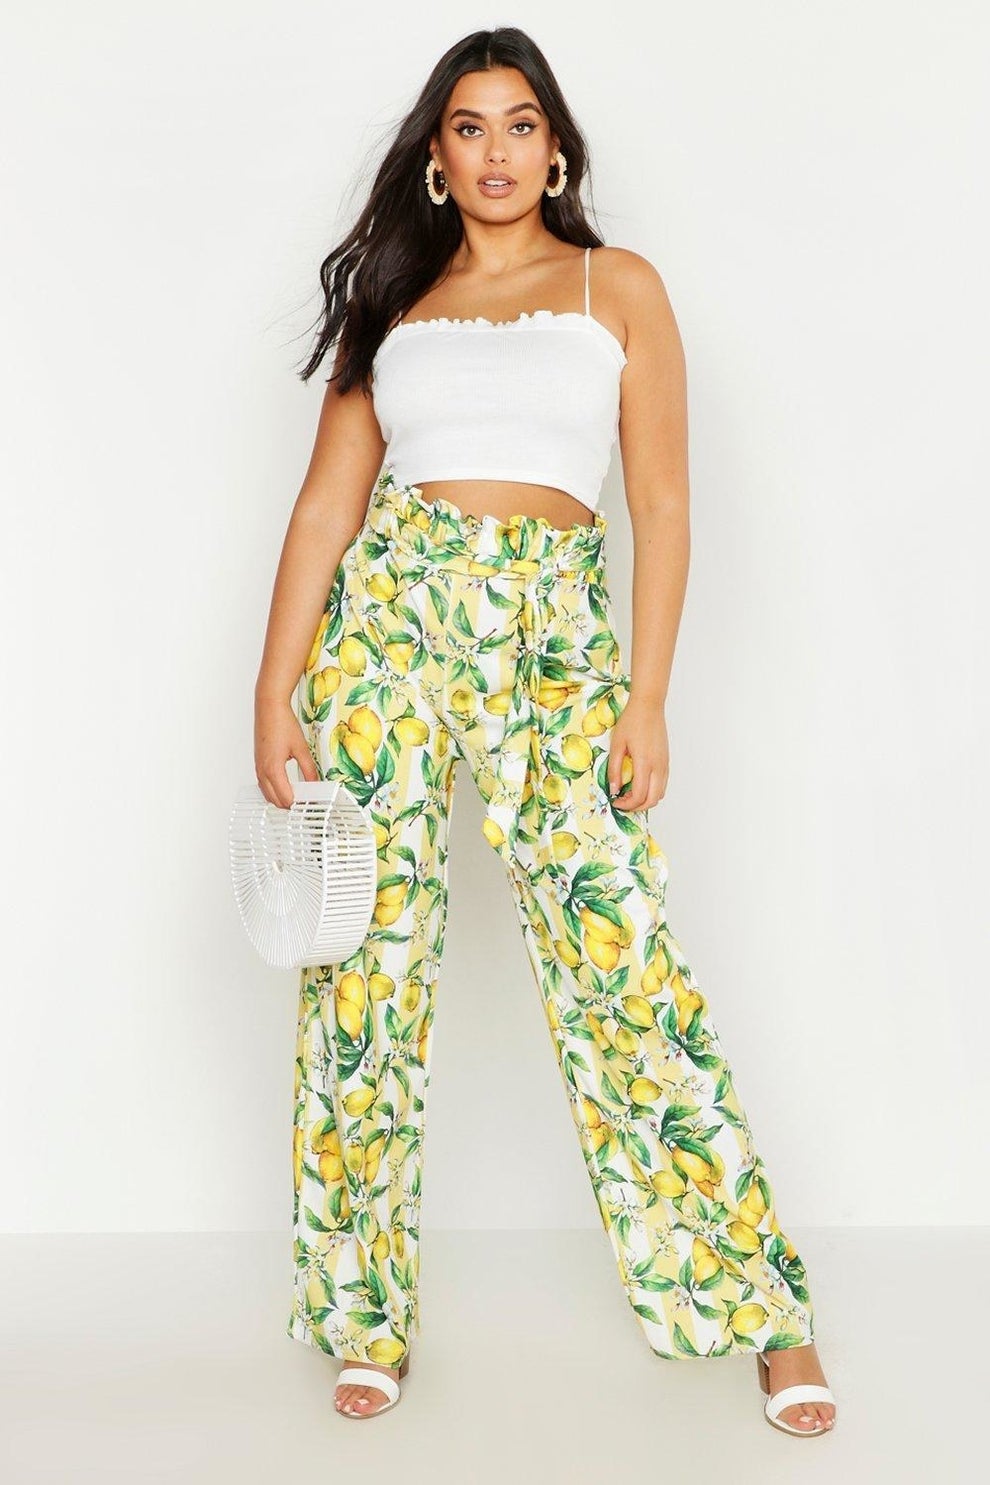 Literally Just 26 Lemon-Printed Things You're Gonna Want To Add To Your  Wardrobe This Summer